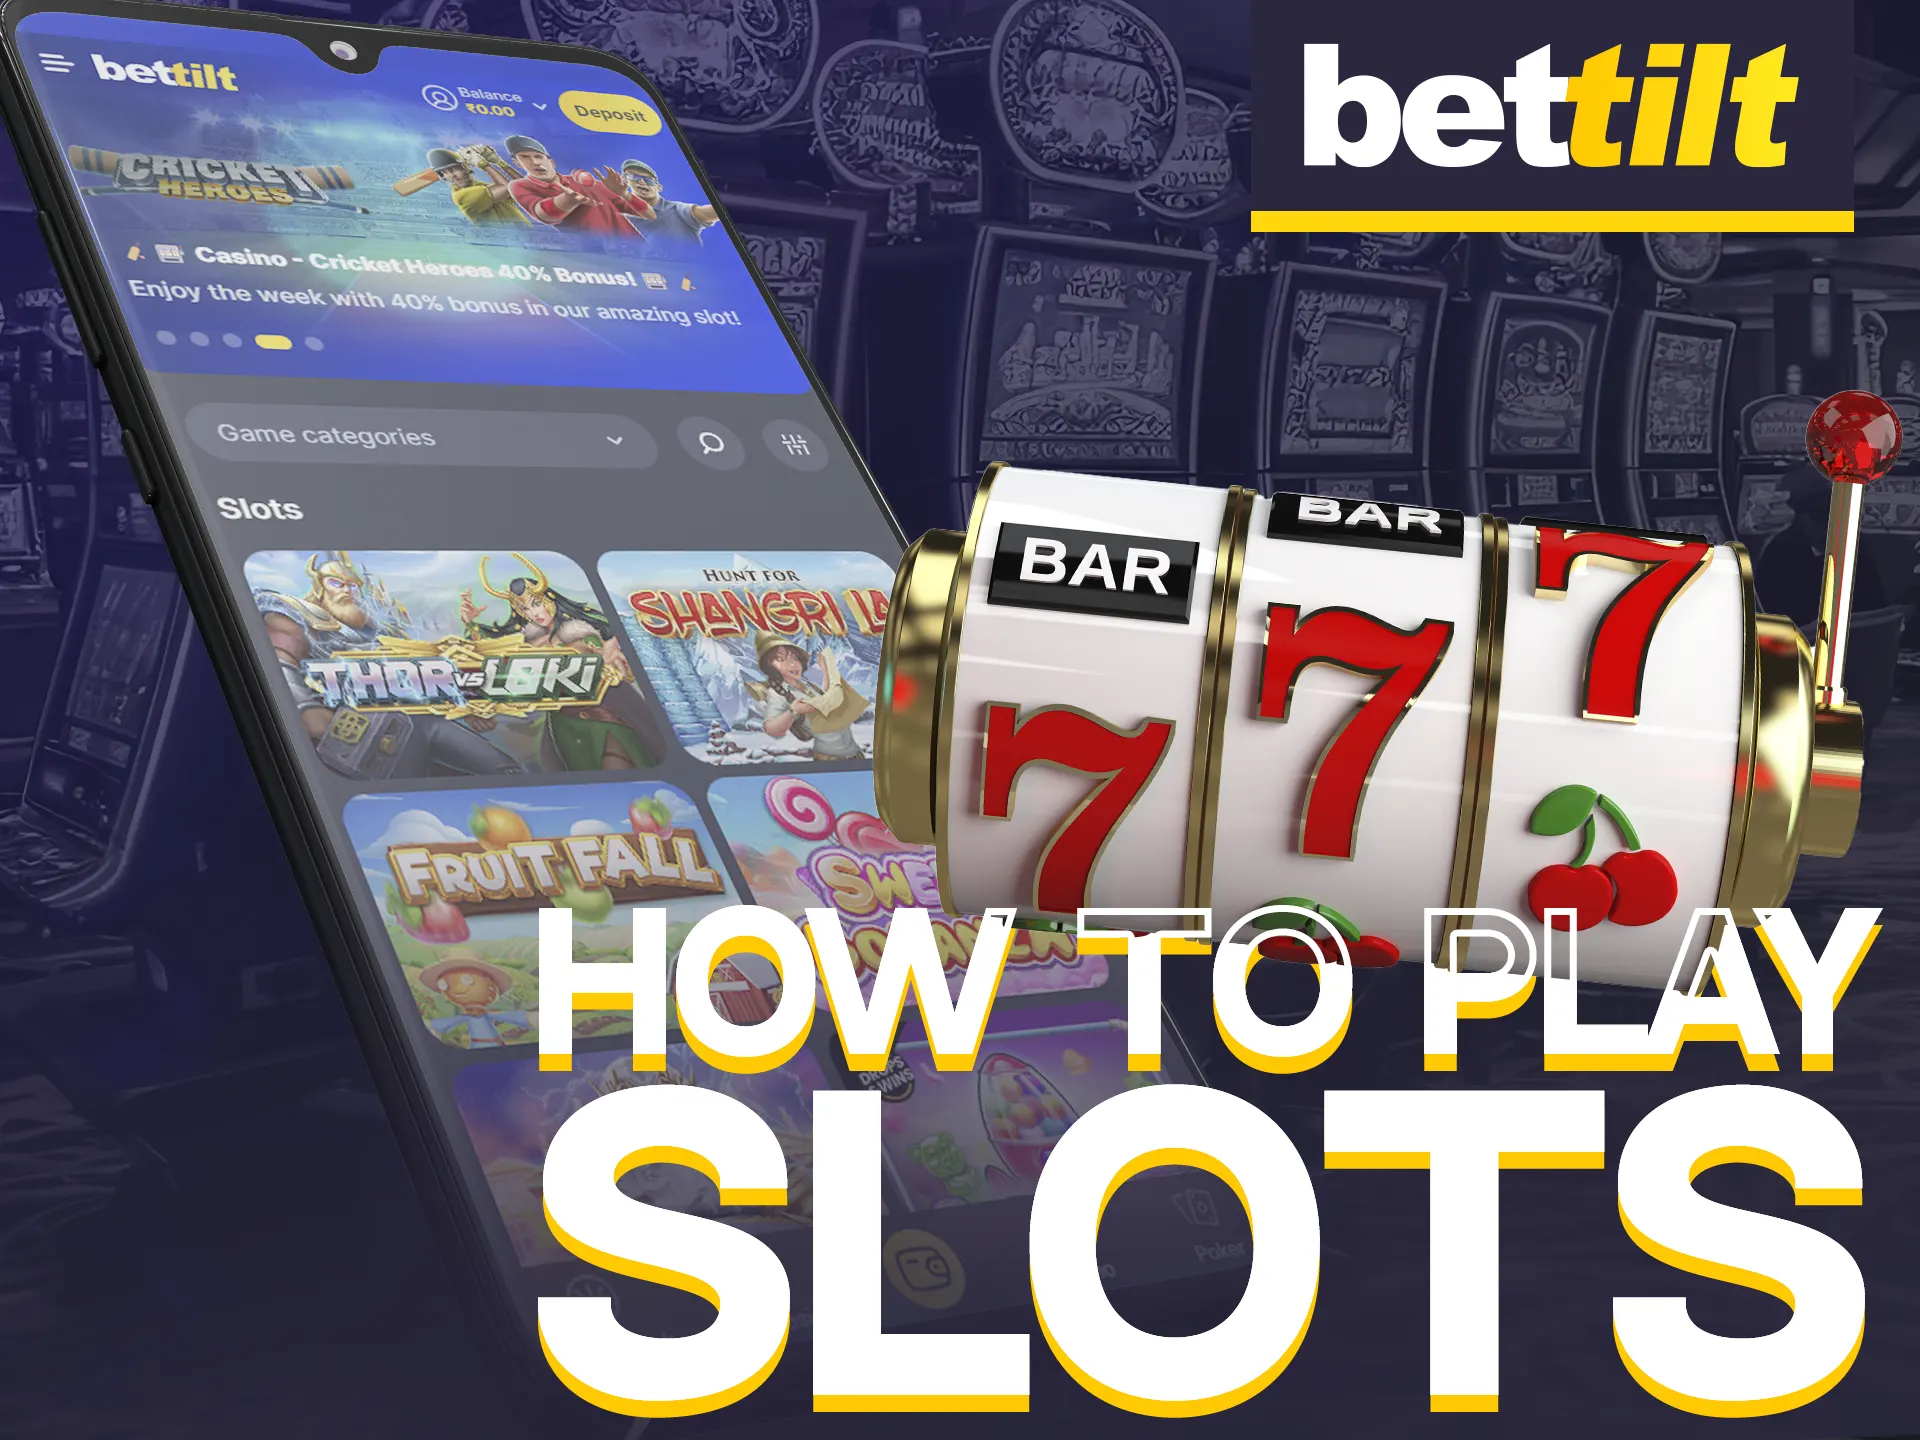 To play slots at Bettilt, log in and deposit money.